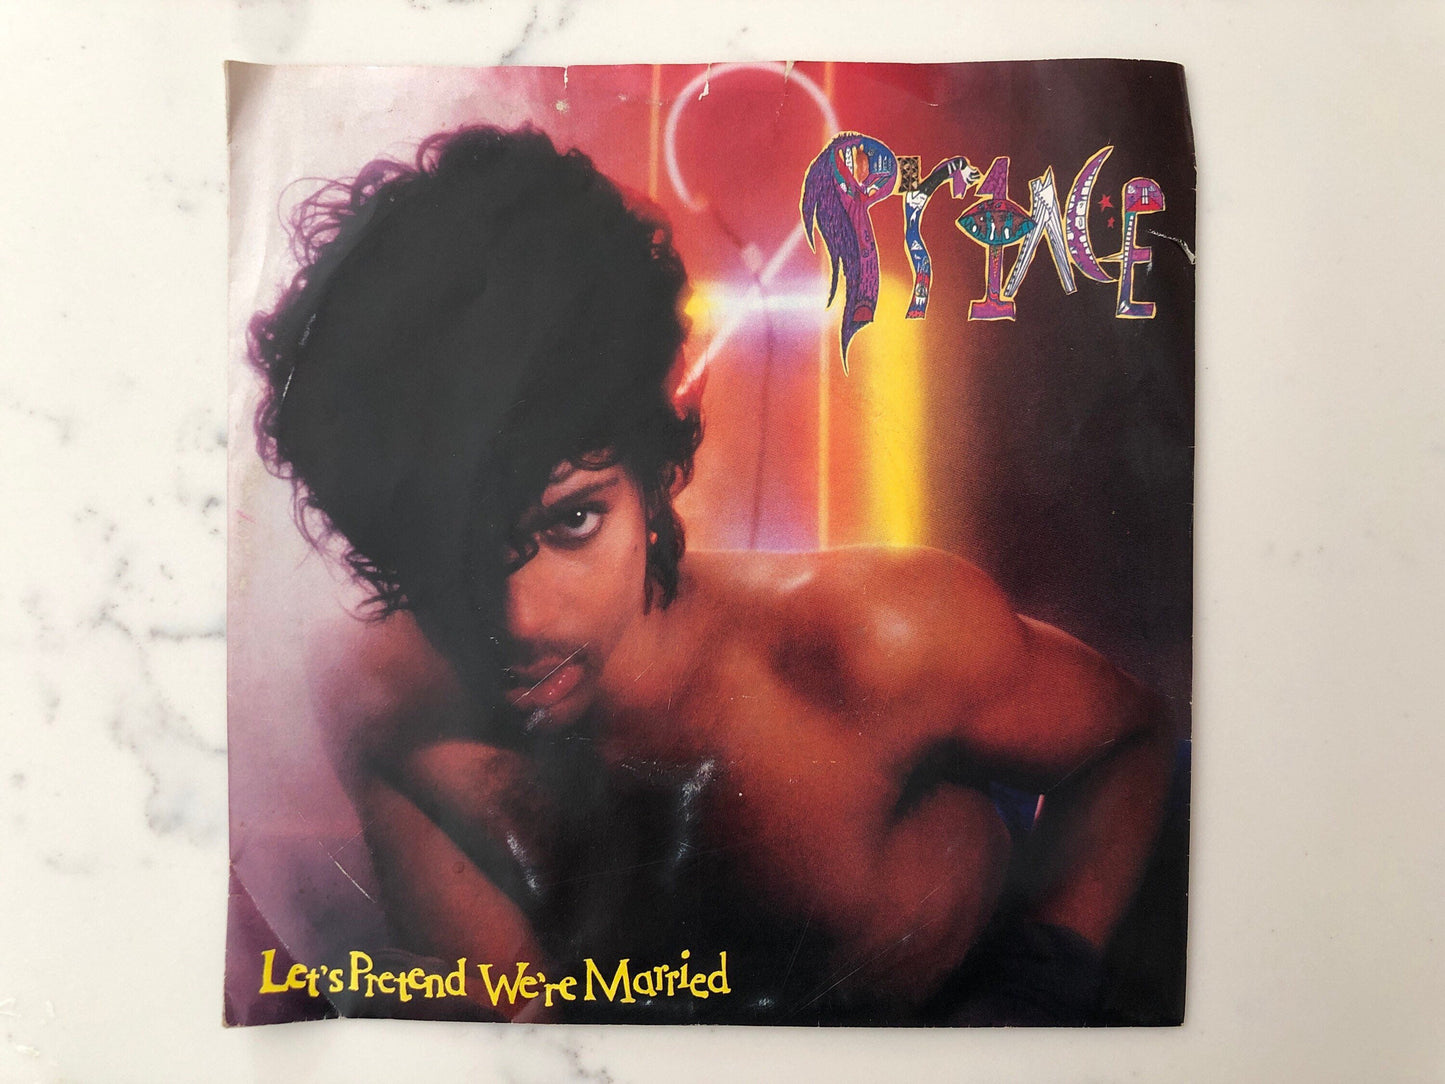 Prince and the Revolution, Let’s Pretend We’re Married, Irresistible Bitch, 7 inch, 1980’s Prince Singles, Vintage Prince Records